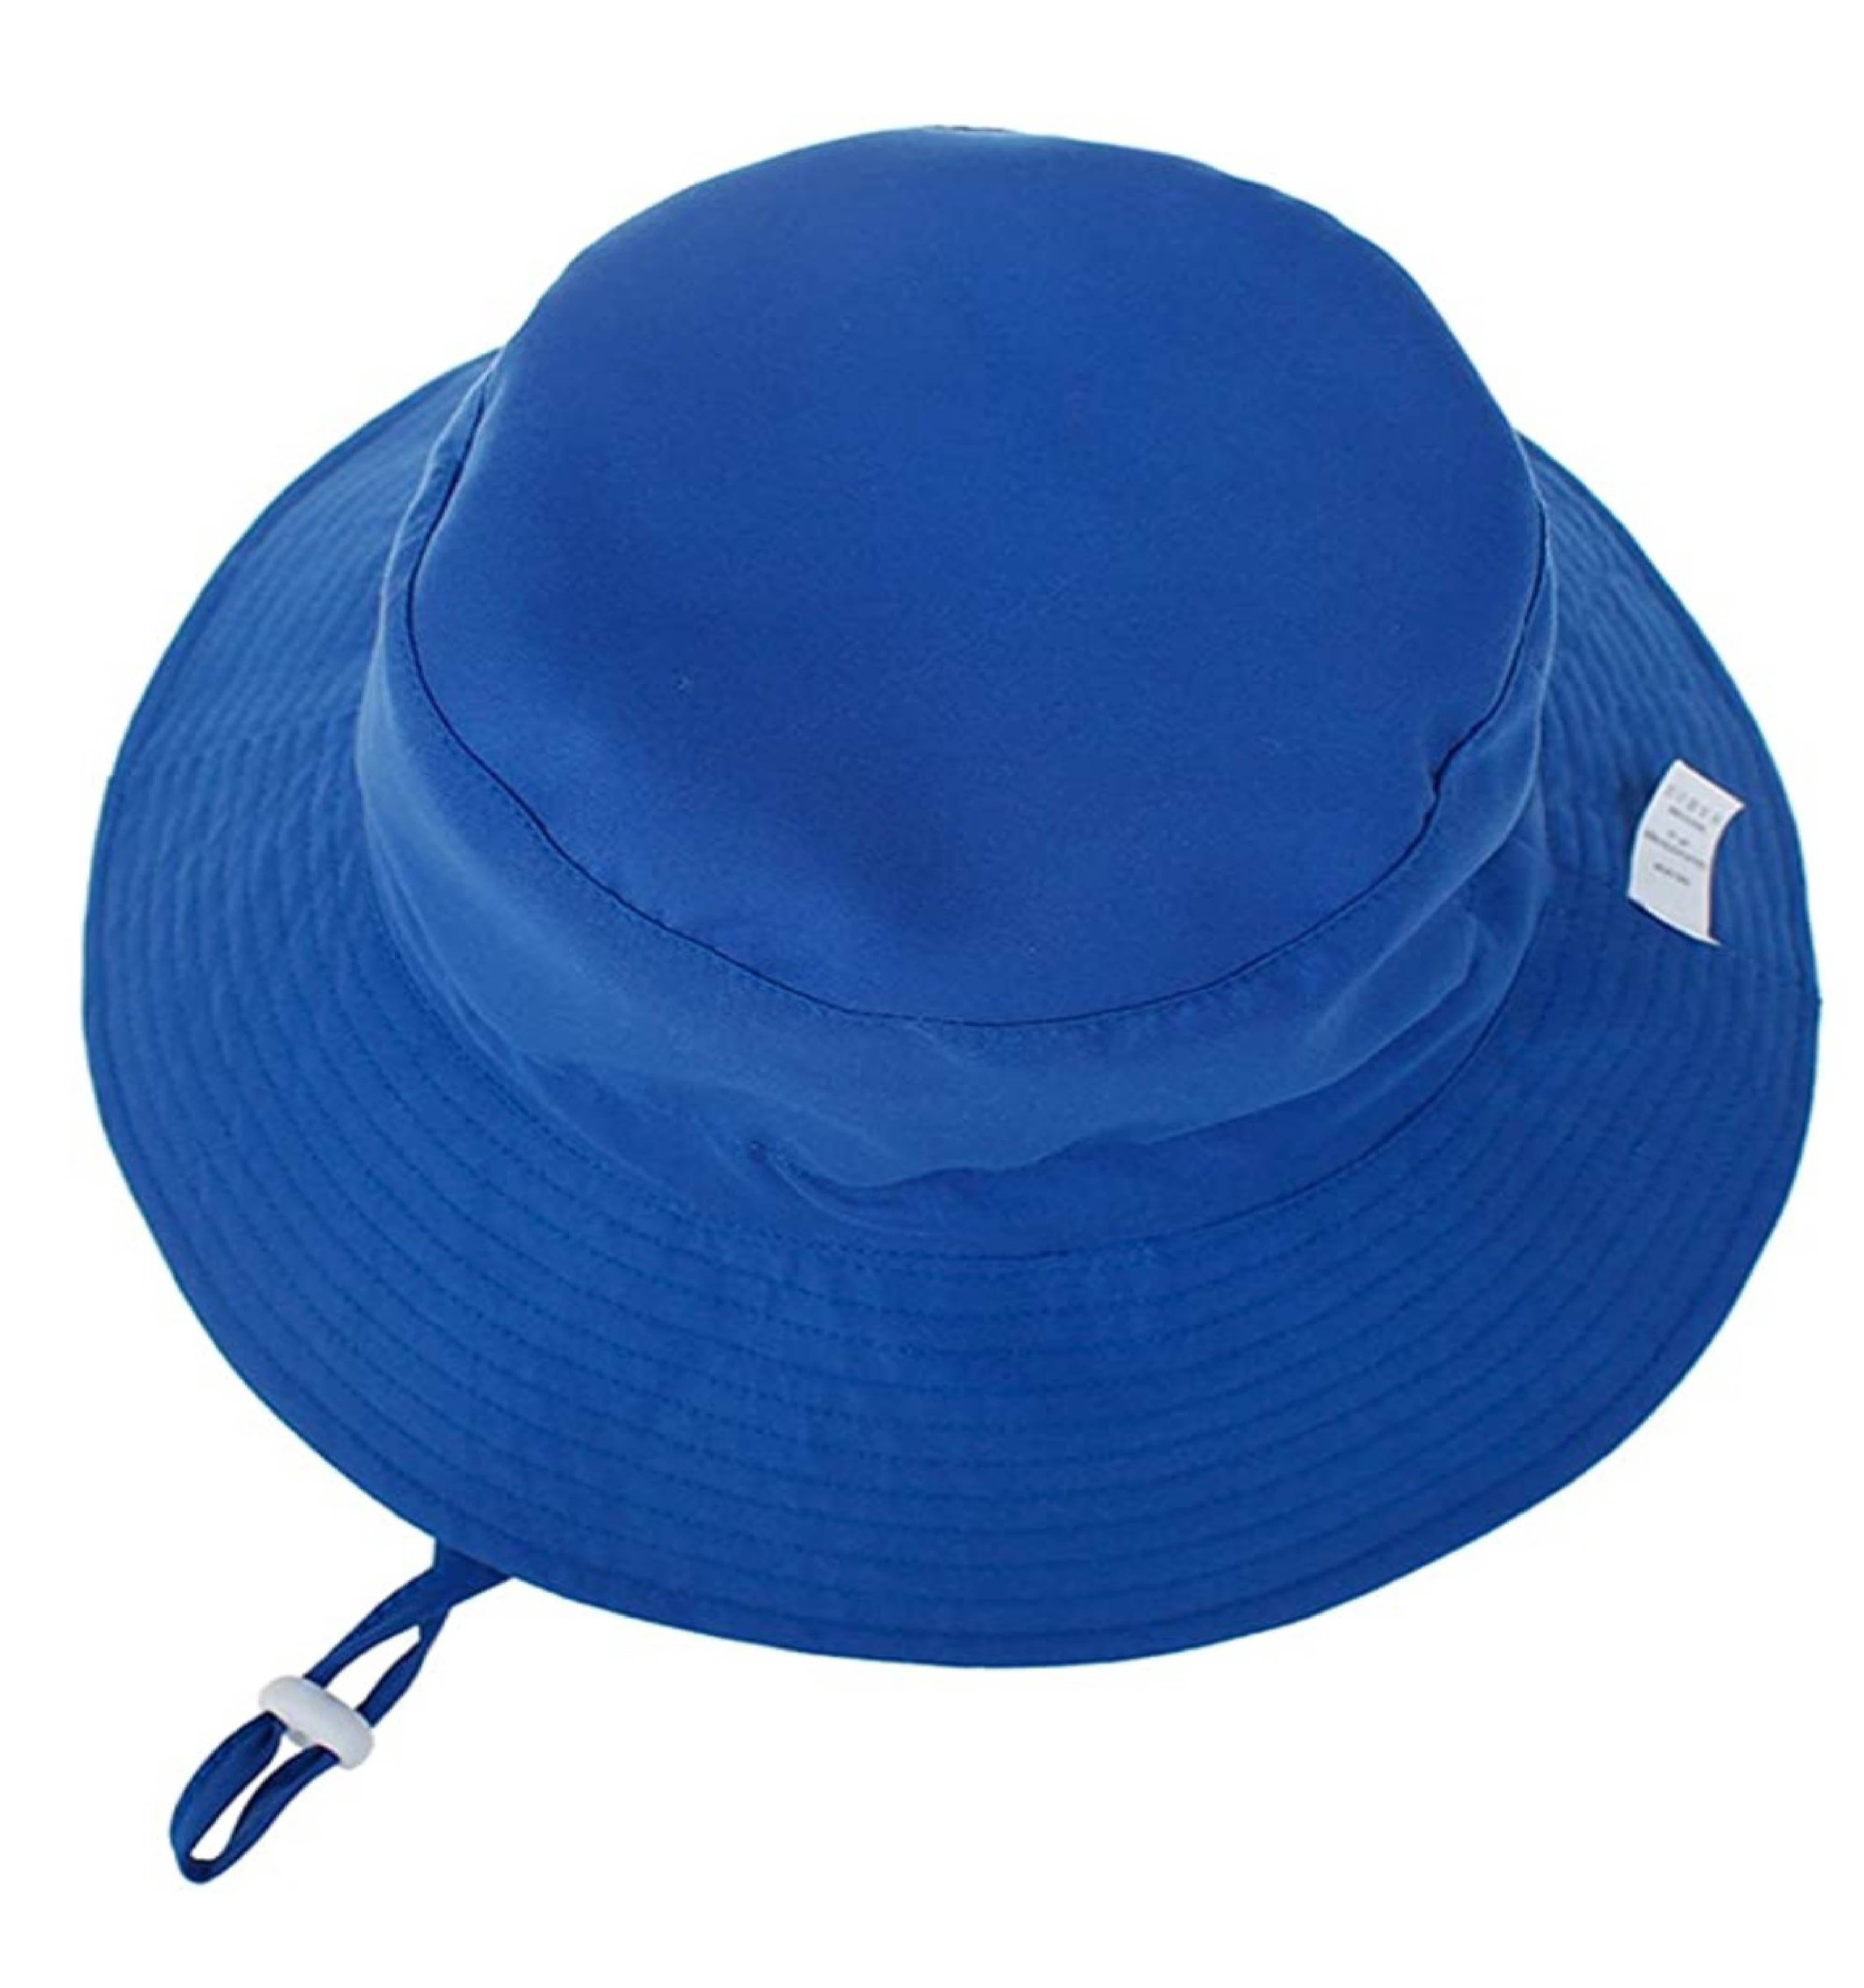 Toddler, Sun Protection Bucket Hat (Royal Blue)